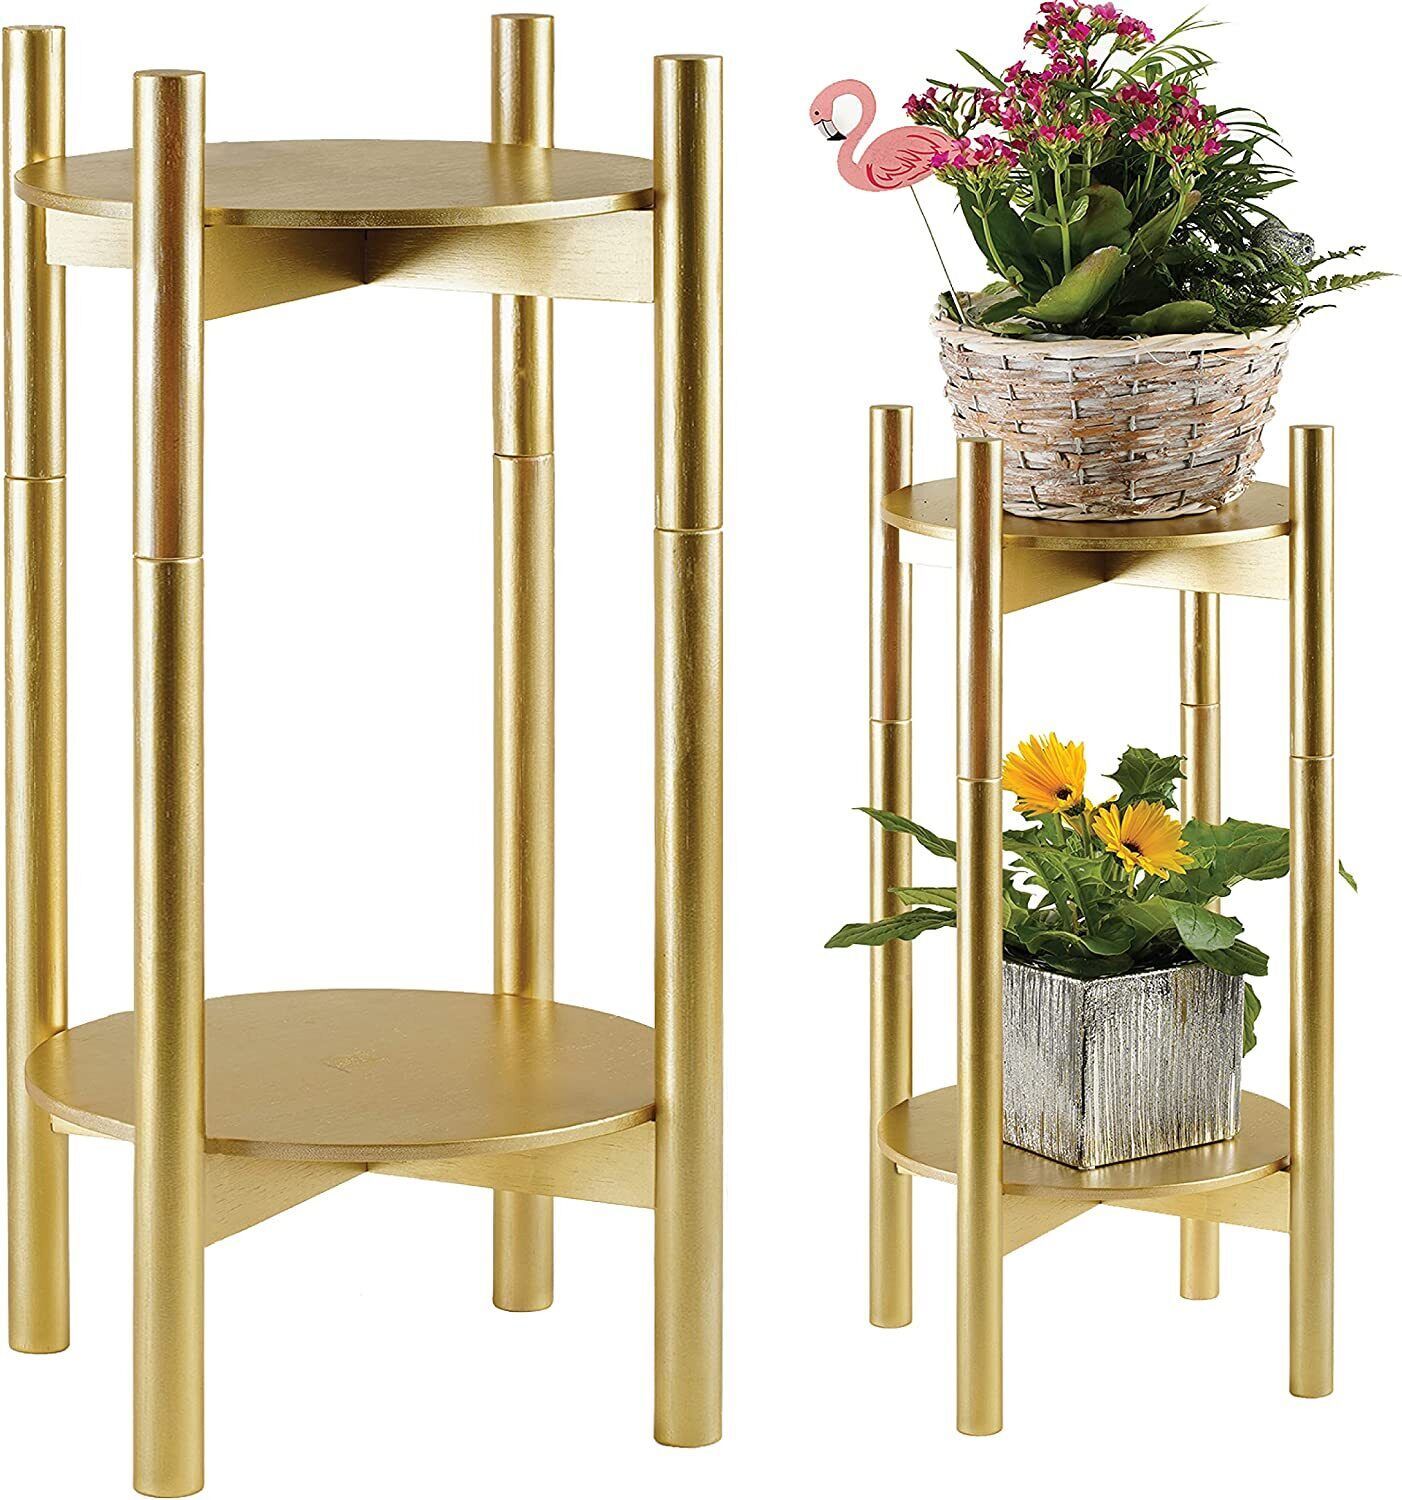 Golden Indoor Plant Stand For 5 To 10 Inch Diameter Planter Pots 24 Inches  High | Ebay Regarding 5 Inch Plant Stands (View 15 of 15)